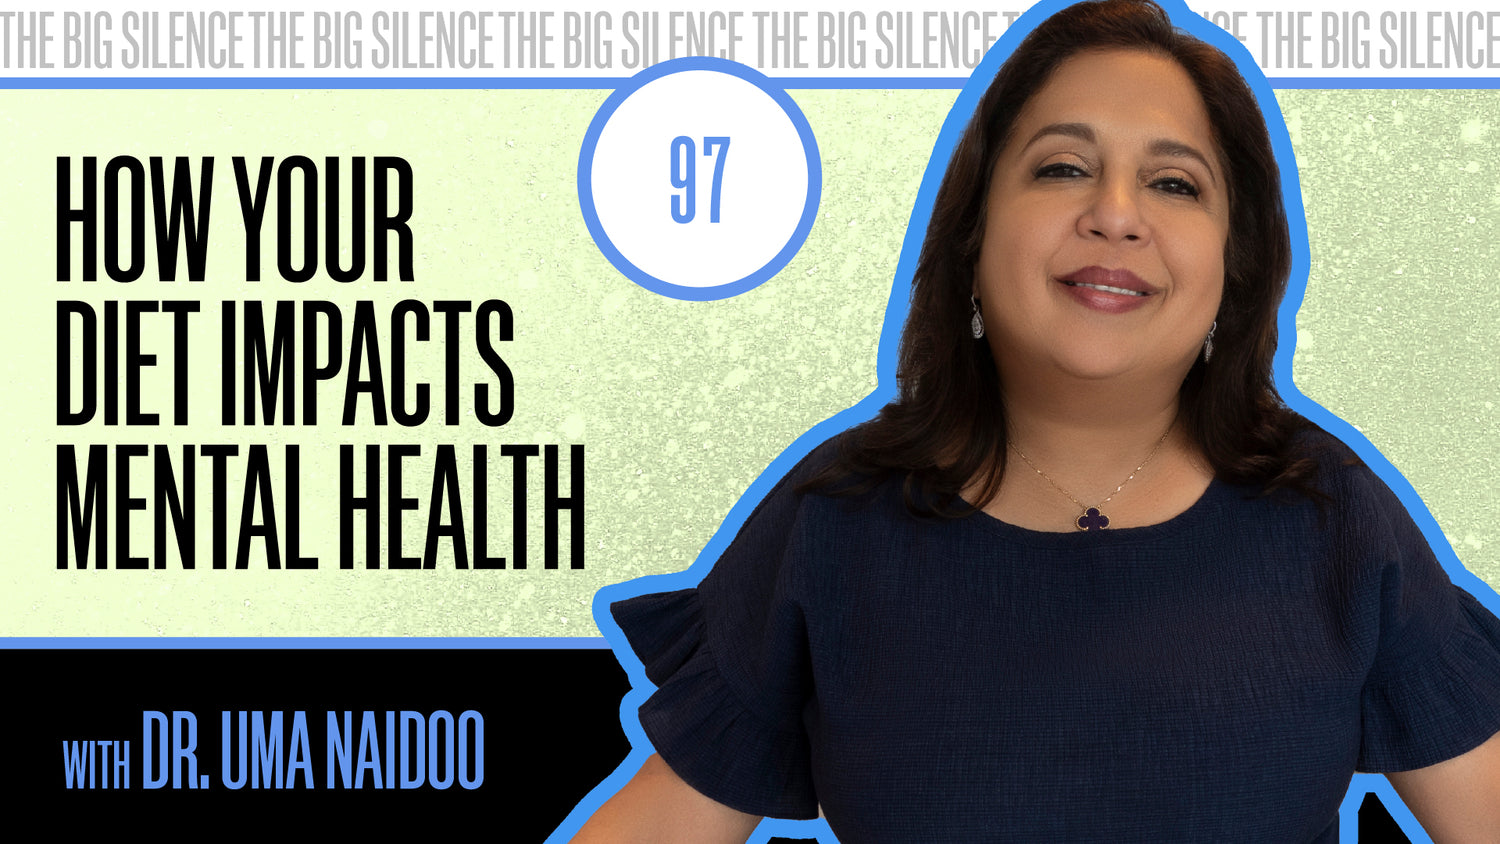 97. COOKING UP ANXIETY RELIEF: HOW YOUR DIET IMPACTS MENTAL HEALTH WITH DR. UMA NAIDOO